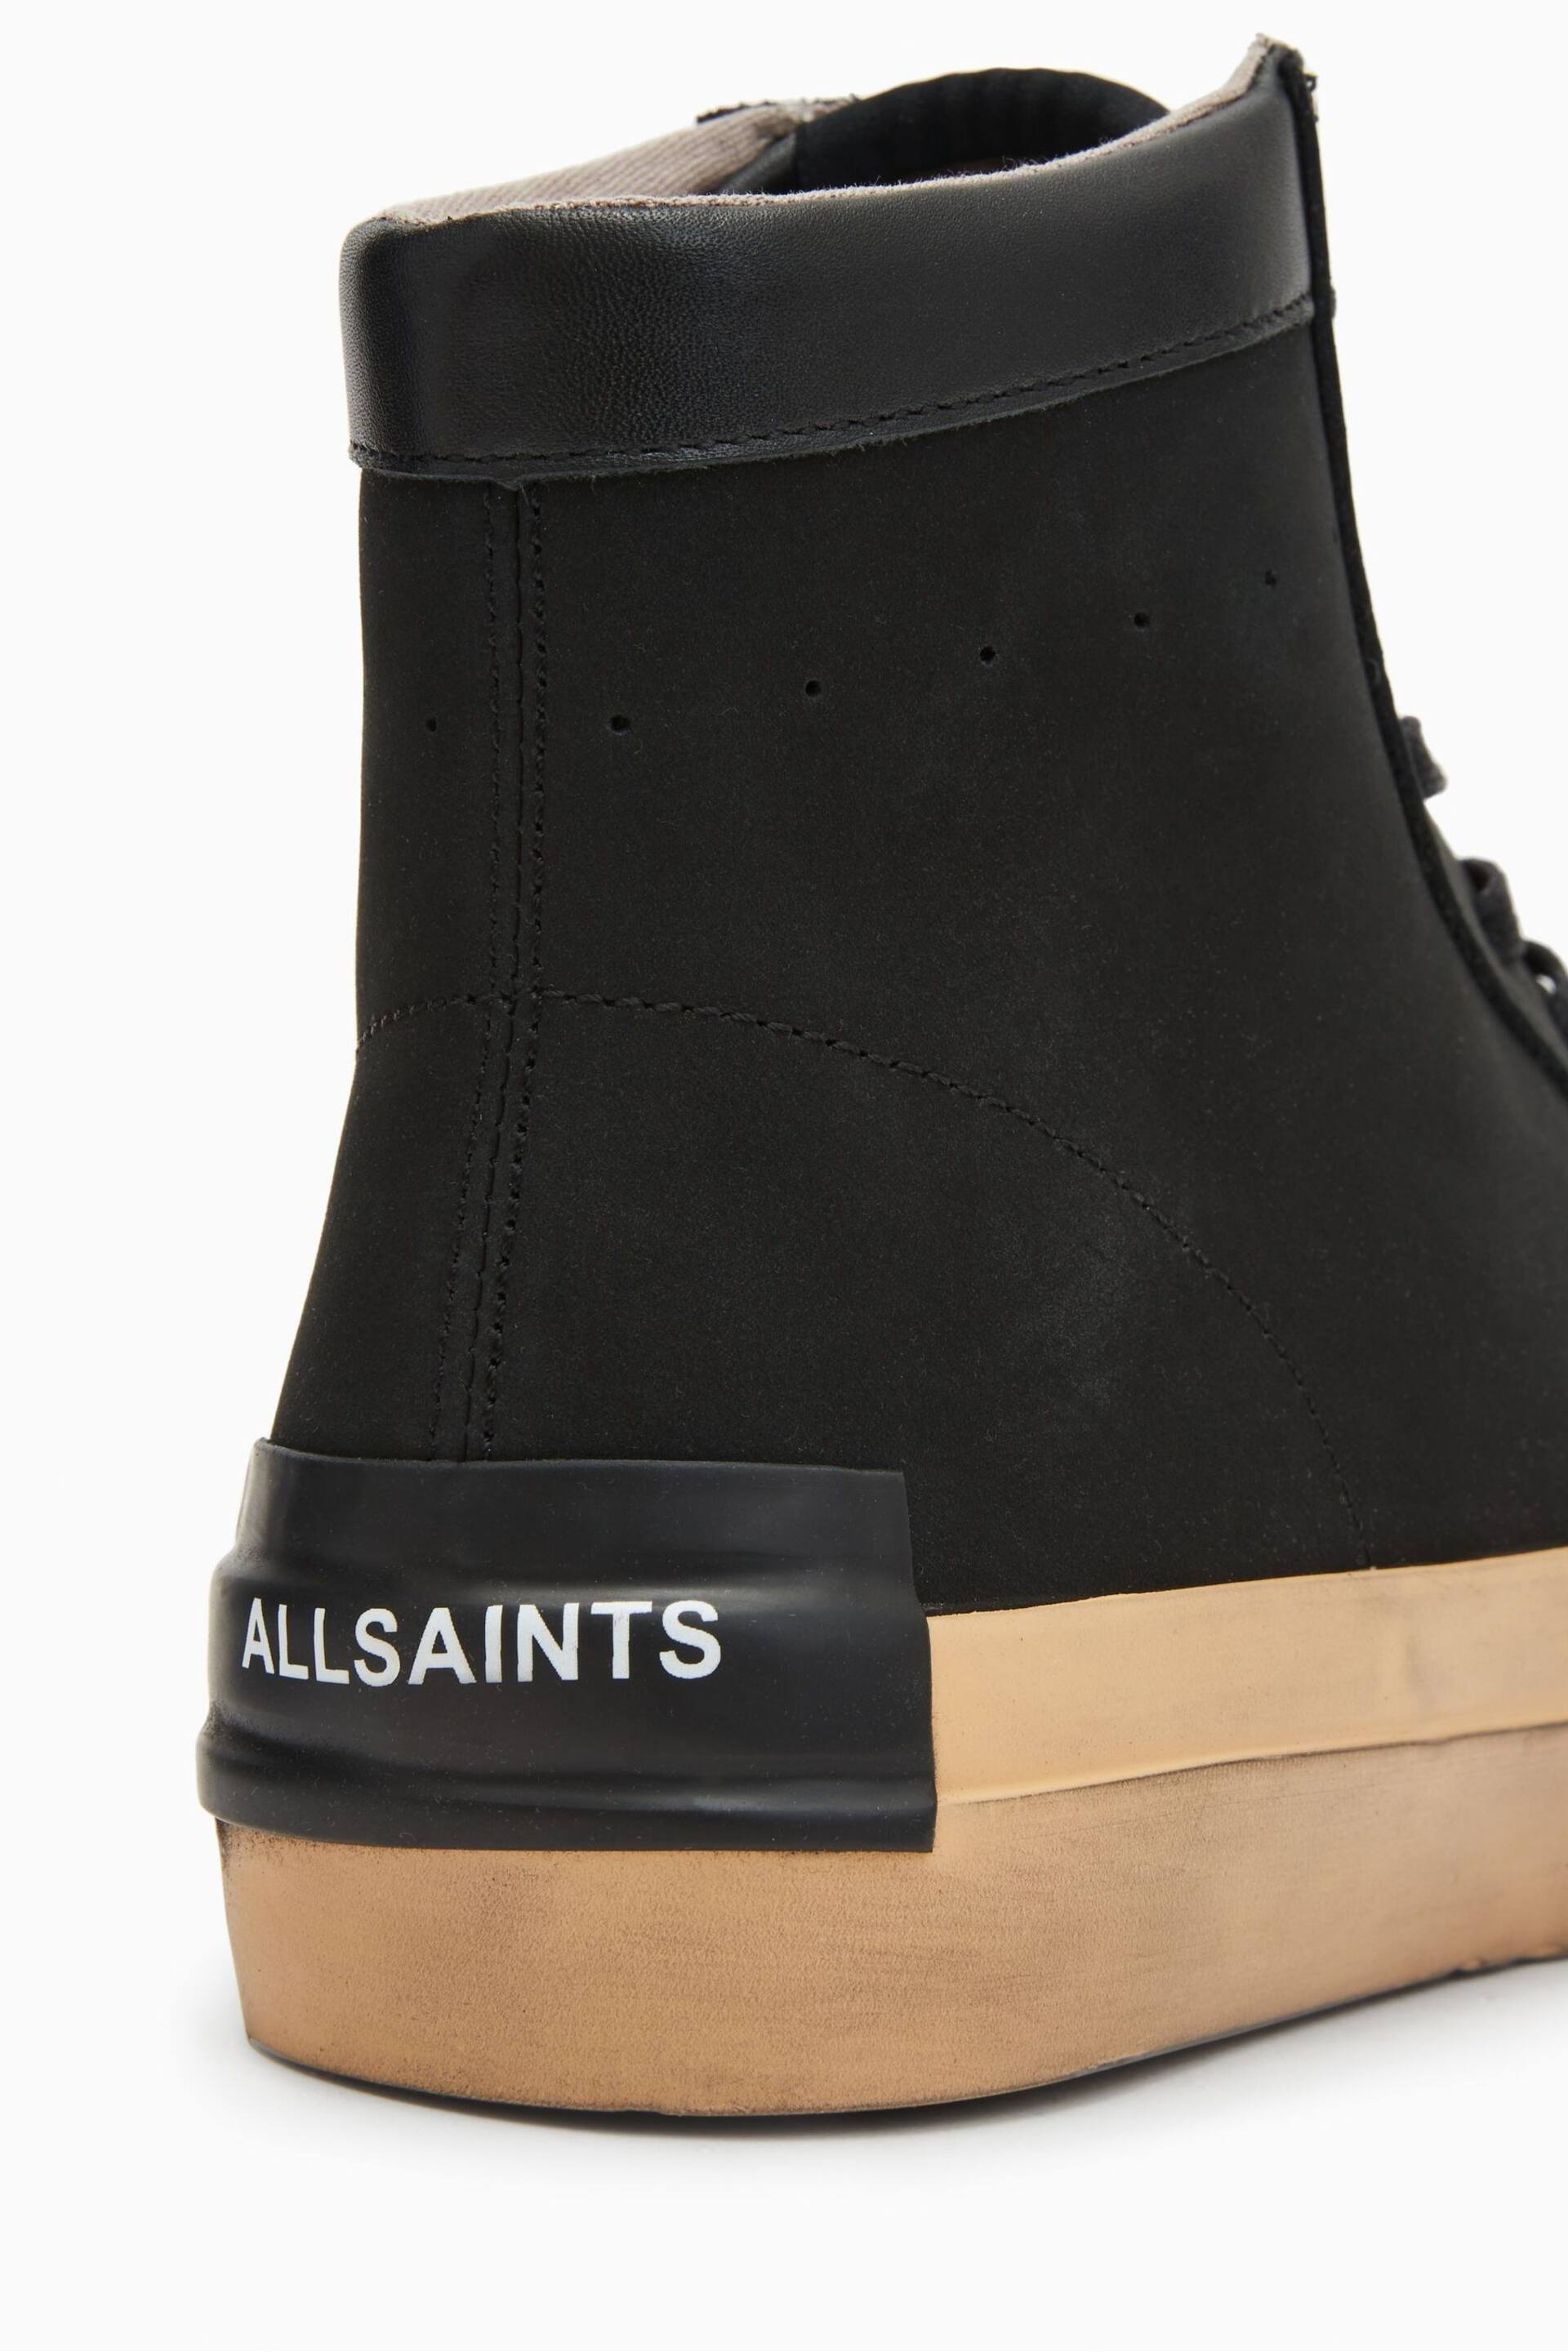 AllSaints Black Smith High Top Shoes - Image 5 of 5